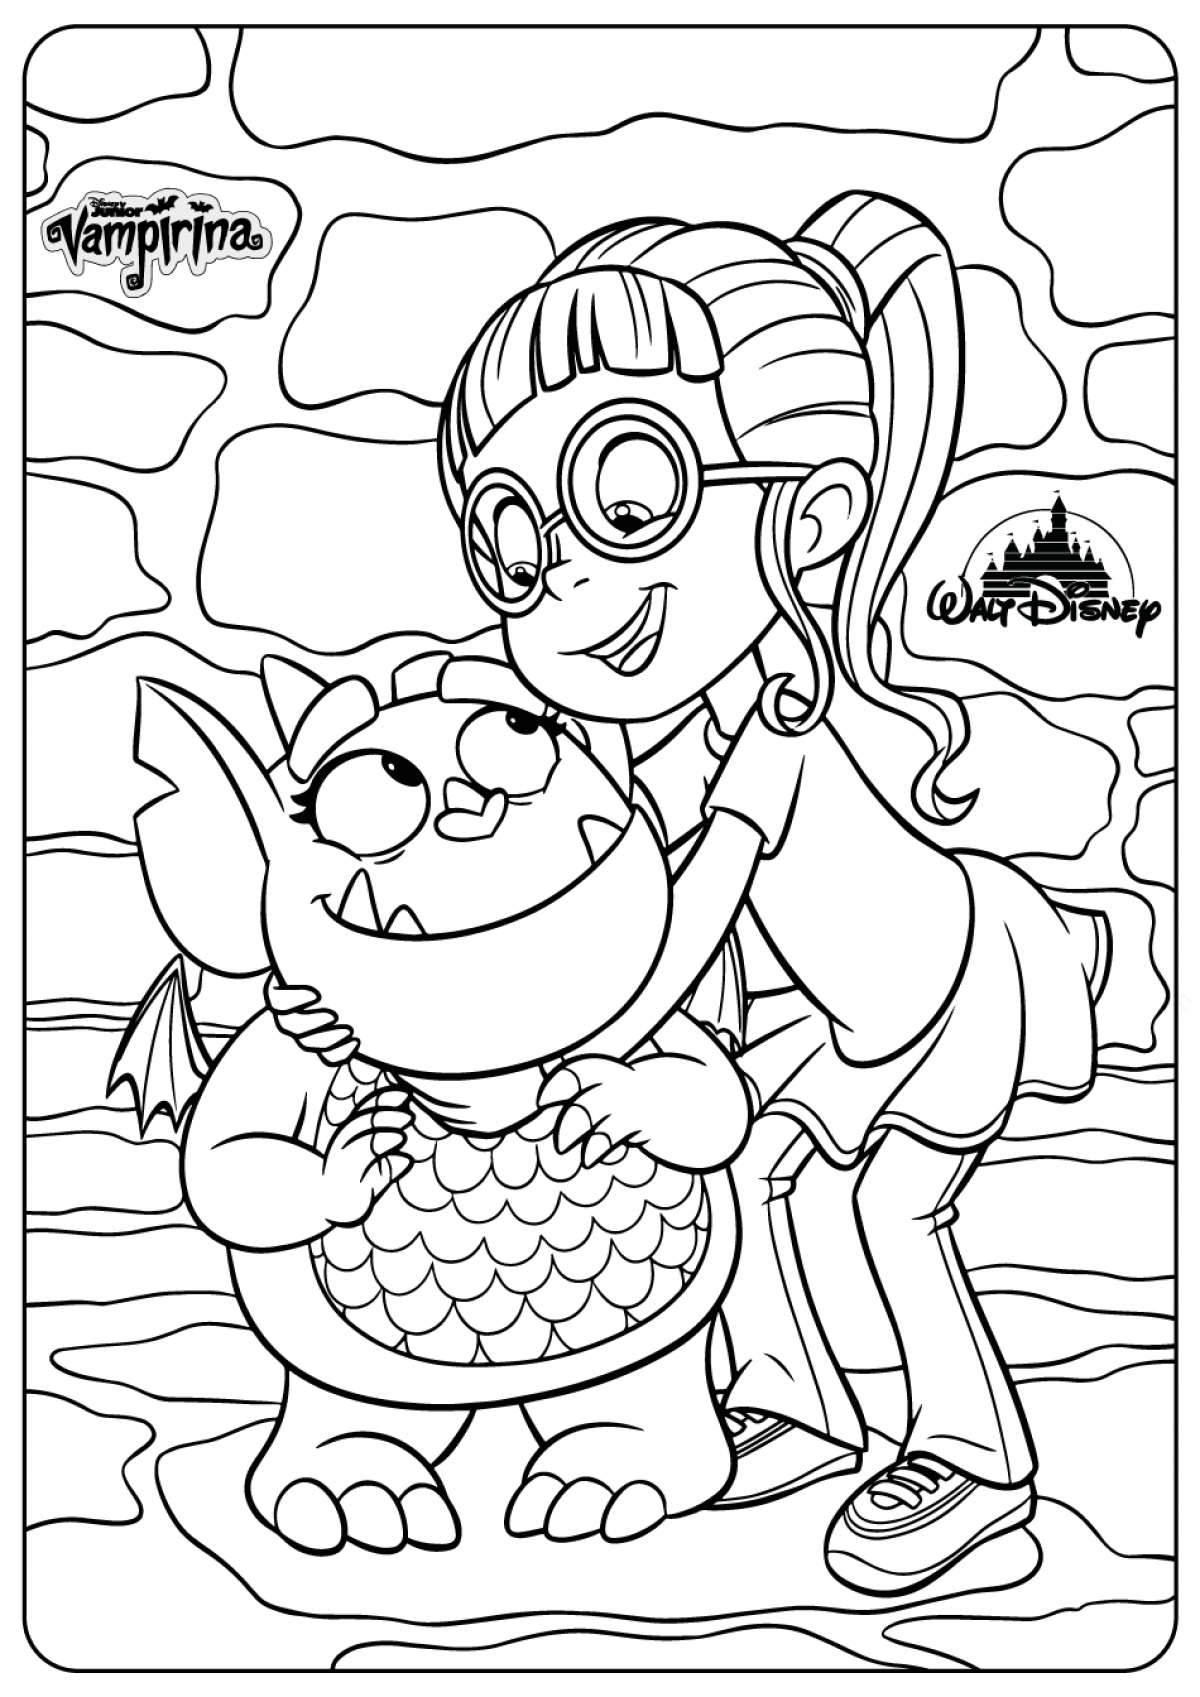 Vampirina Coloring Pages   Best Coloring Pages For Kids